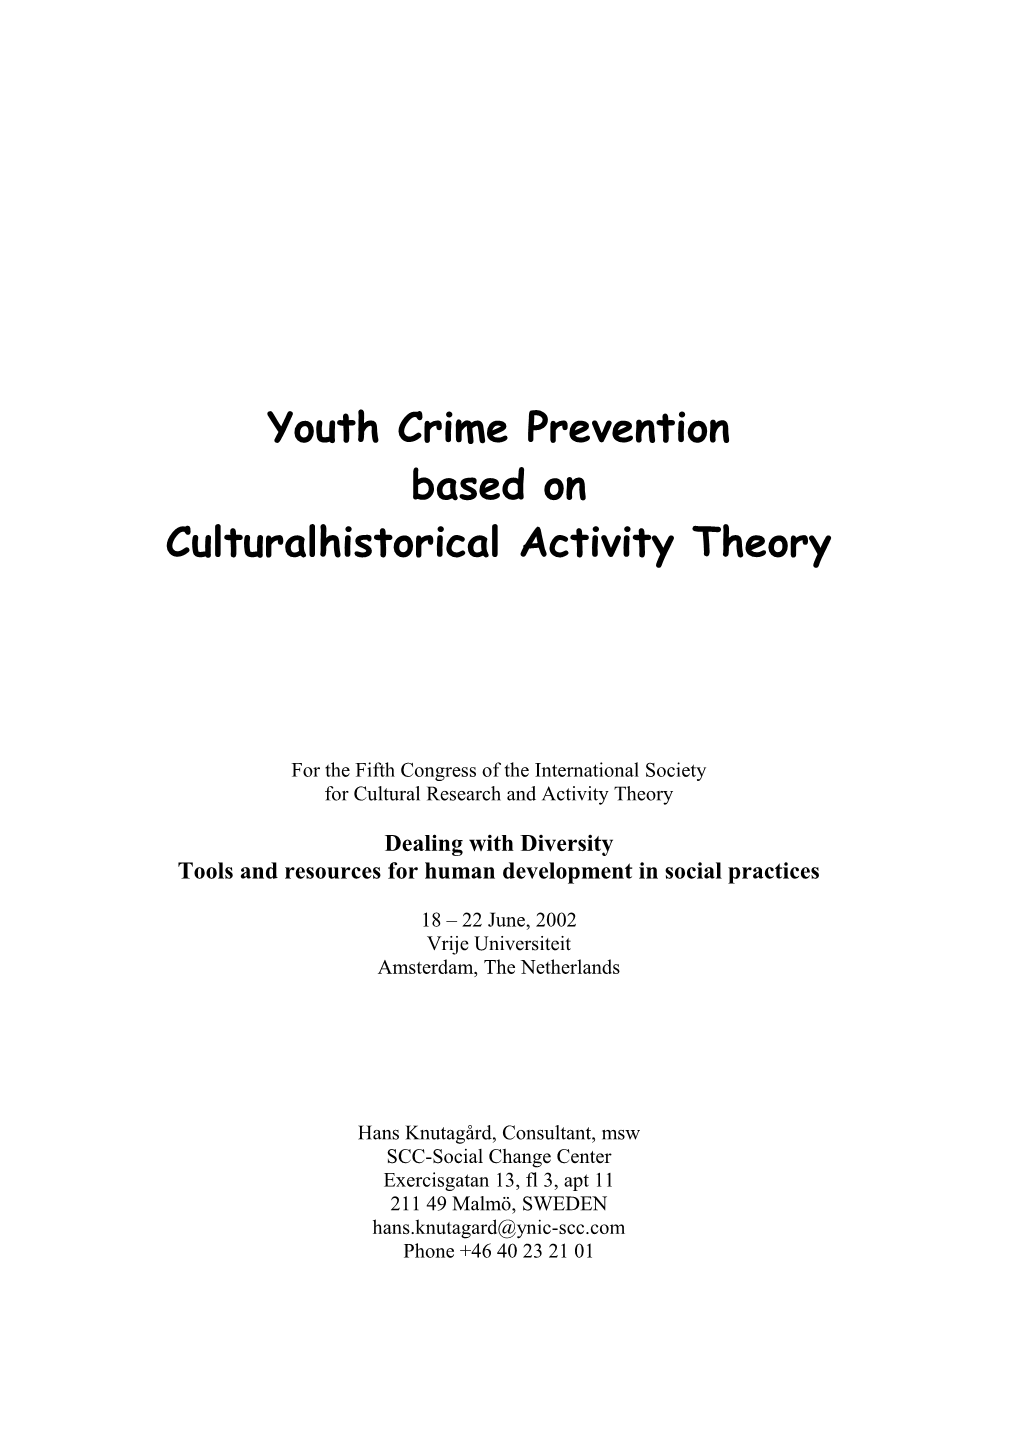 Youth Crime Prevention Based on Cultural-Historical Activity Theory